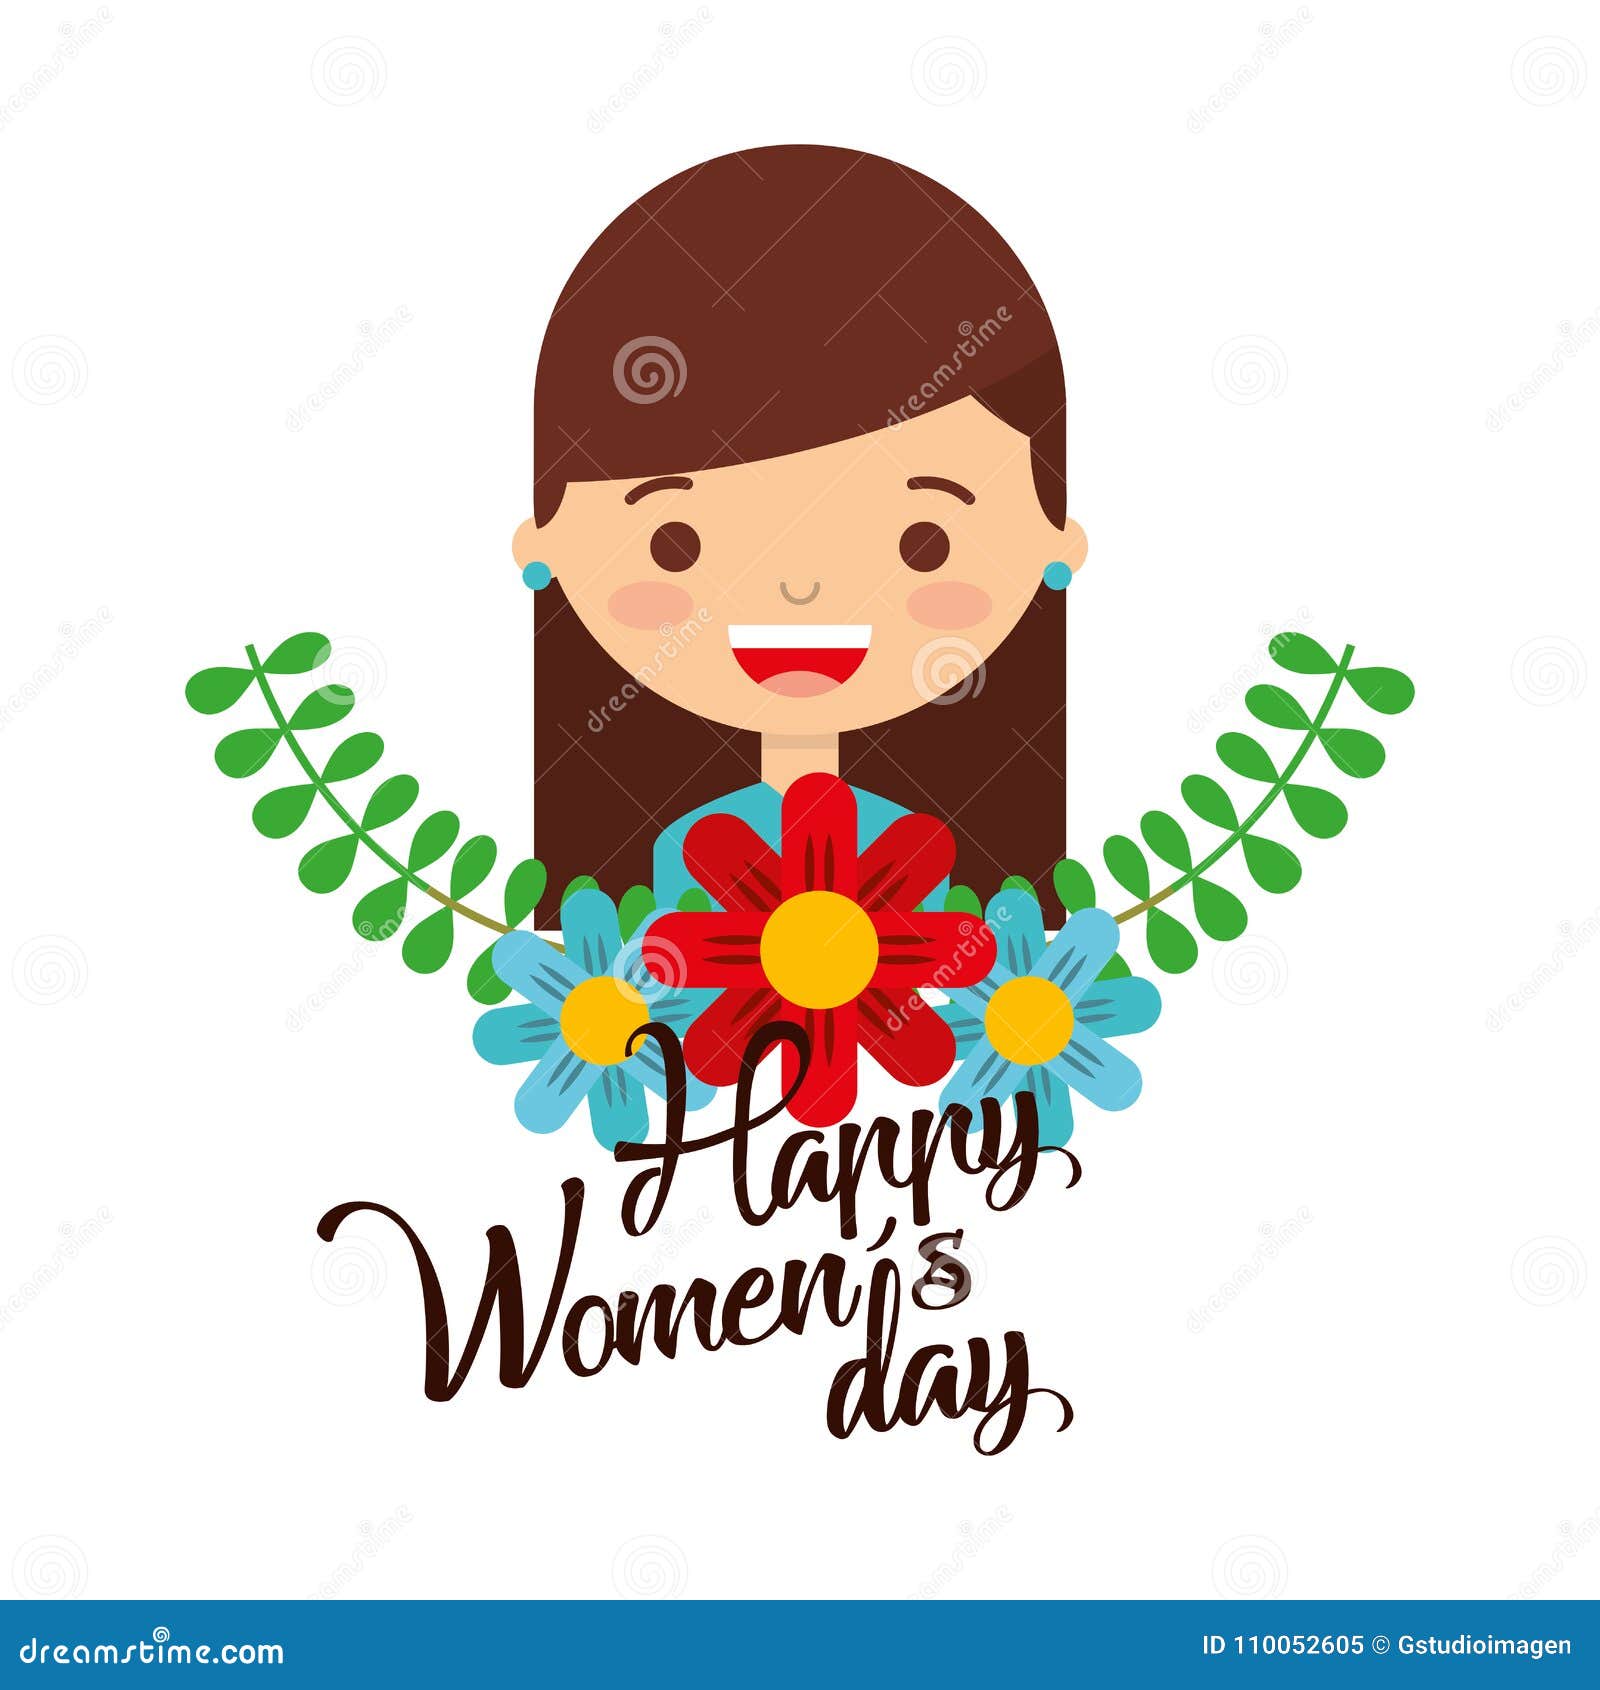 Happy Womens Day Design with Cute Stock Vector - Illustration of abstract,  holiday: 110052605